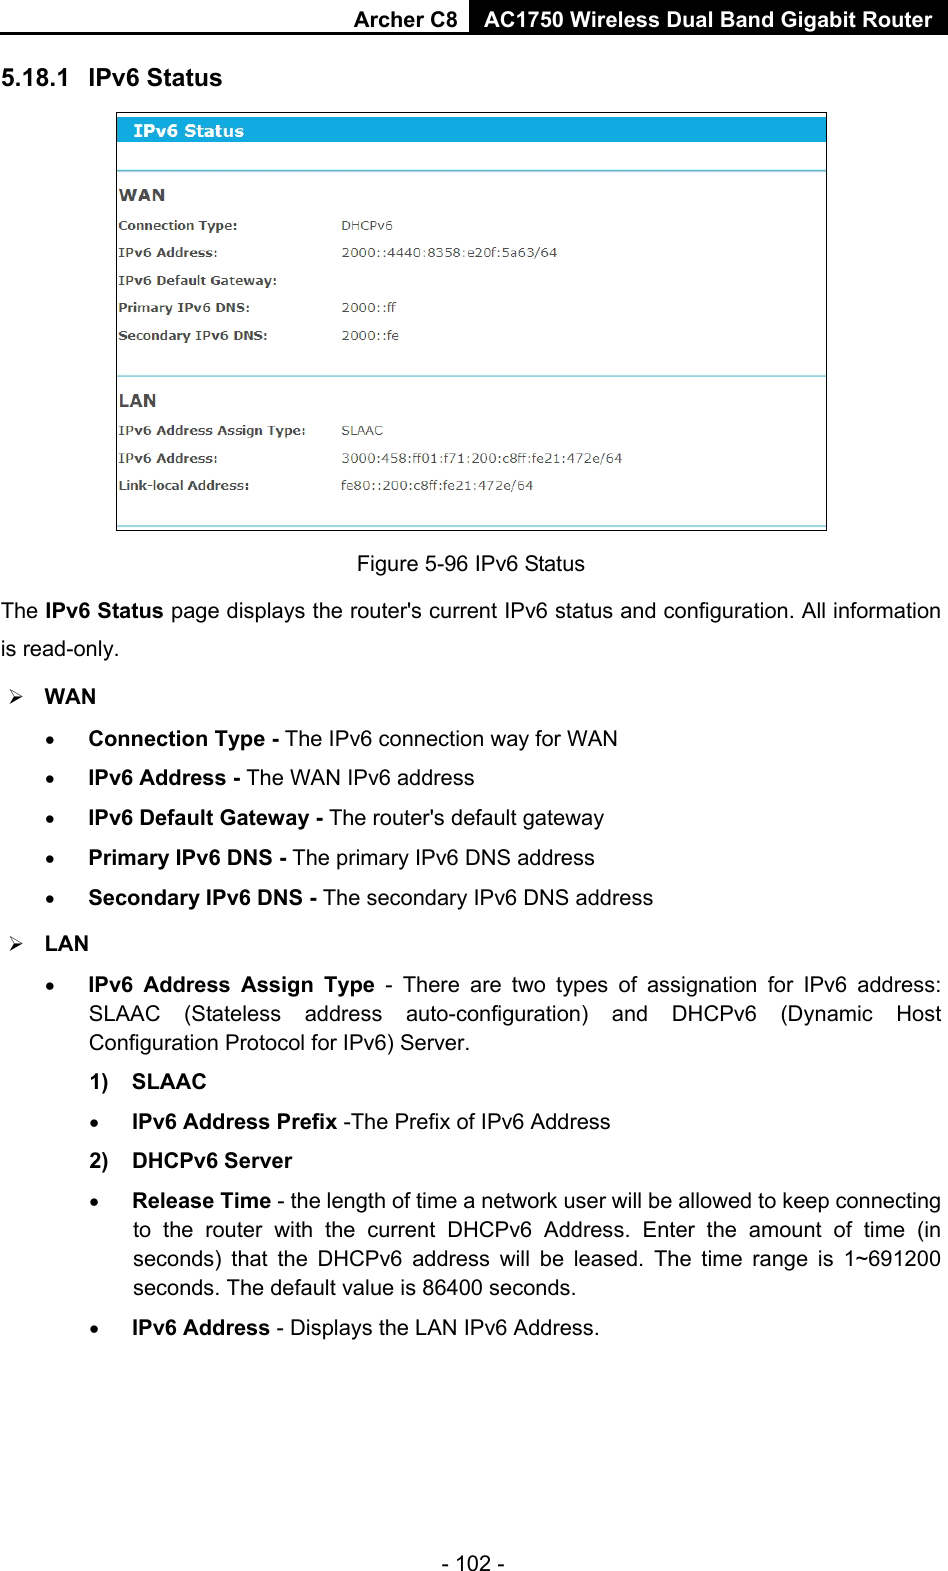 Archer C8 AC1750 Wireless Dual Band Gigabit Router  - 102 - 5.18.1 IPv6 Status  Figure 5-96 IPv6 Status The IPv6 Status page displays the router&apos;s current IPv6 status and configuration. All information is read-only.    WAN   • Connection Type - The IPv6 connection way for WAN • IPv6 Address - The WAN IPv6 address • IPv6 Default Gateway - The router&apos;s default gateway • Primary IPv6 DNS - The primary IPv6 DNS address • Secondary IPv6 DNS - The secondary IPv6 DNS address  LAN • IPv6 Address Assign Type  -  There are two types of assignation for IPv6 address: SLAAC (Stateless address auto-configuration) and DHCPv6 (Dynamic Host Configuration Protocol for IPv6) Server. 1) SLAAC • IPv6 Address Prefix -The Prefix of IPv6 Address 2) DHCPv6 Server • Release Time - the length of time a network user will be allowed to keep connecting to the router with the current DHCPv6 Address. Enter the amount of time (in seconds) that the DHCPv6 address will be leased. The time range is 1~691200 seconds. The default value is 86400 seconds. • IPv6 Address - Displays the LAN IPv6 Address. 